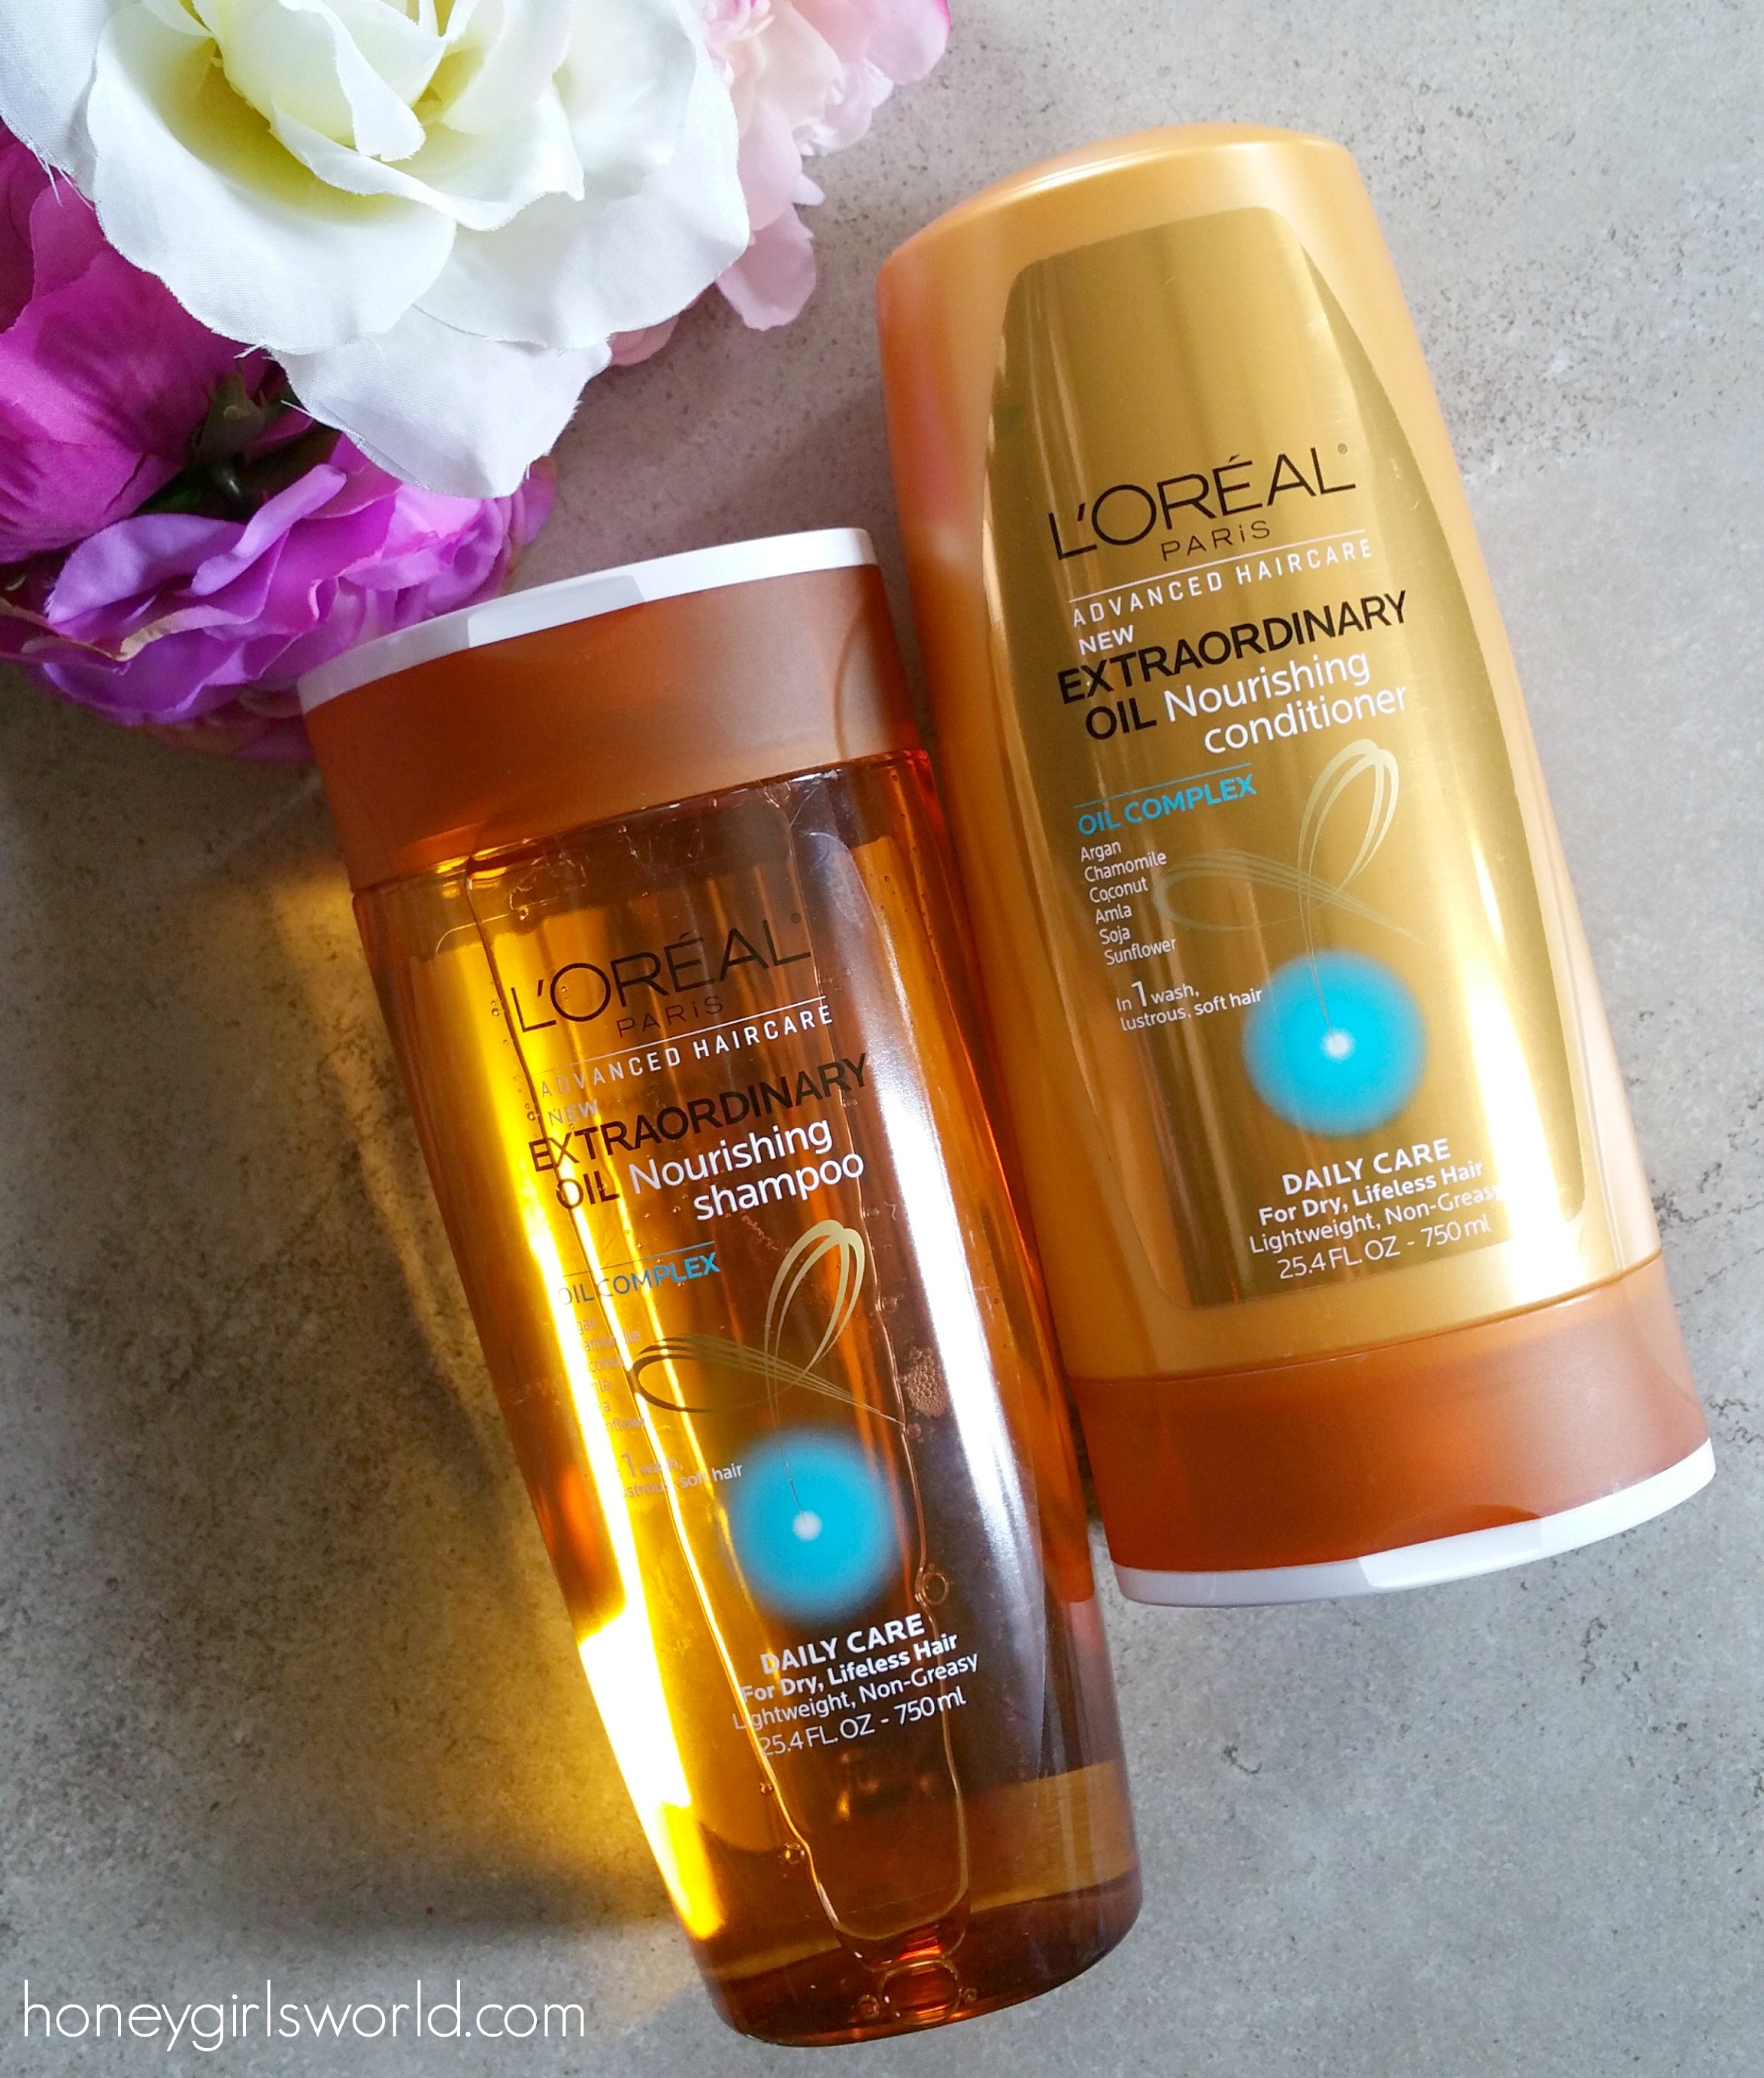 L'Oreal Paris, L'Oreal, extraordinary oil nourishing shampoo, extraordinary oil, hair care, hair, haircare, hair products, shampoo, conditioner, mask, hair mask, L'Oreal hair, curly hair, 